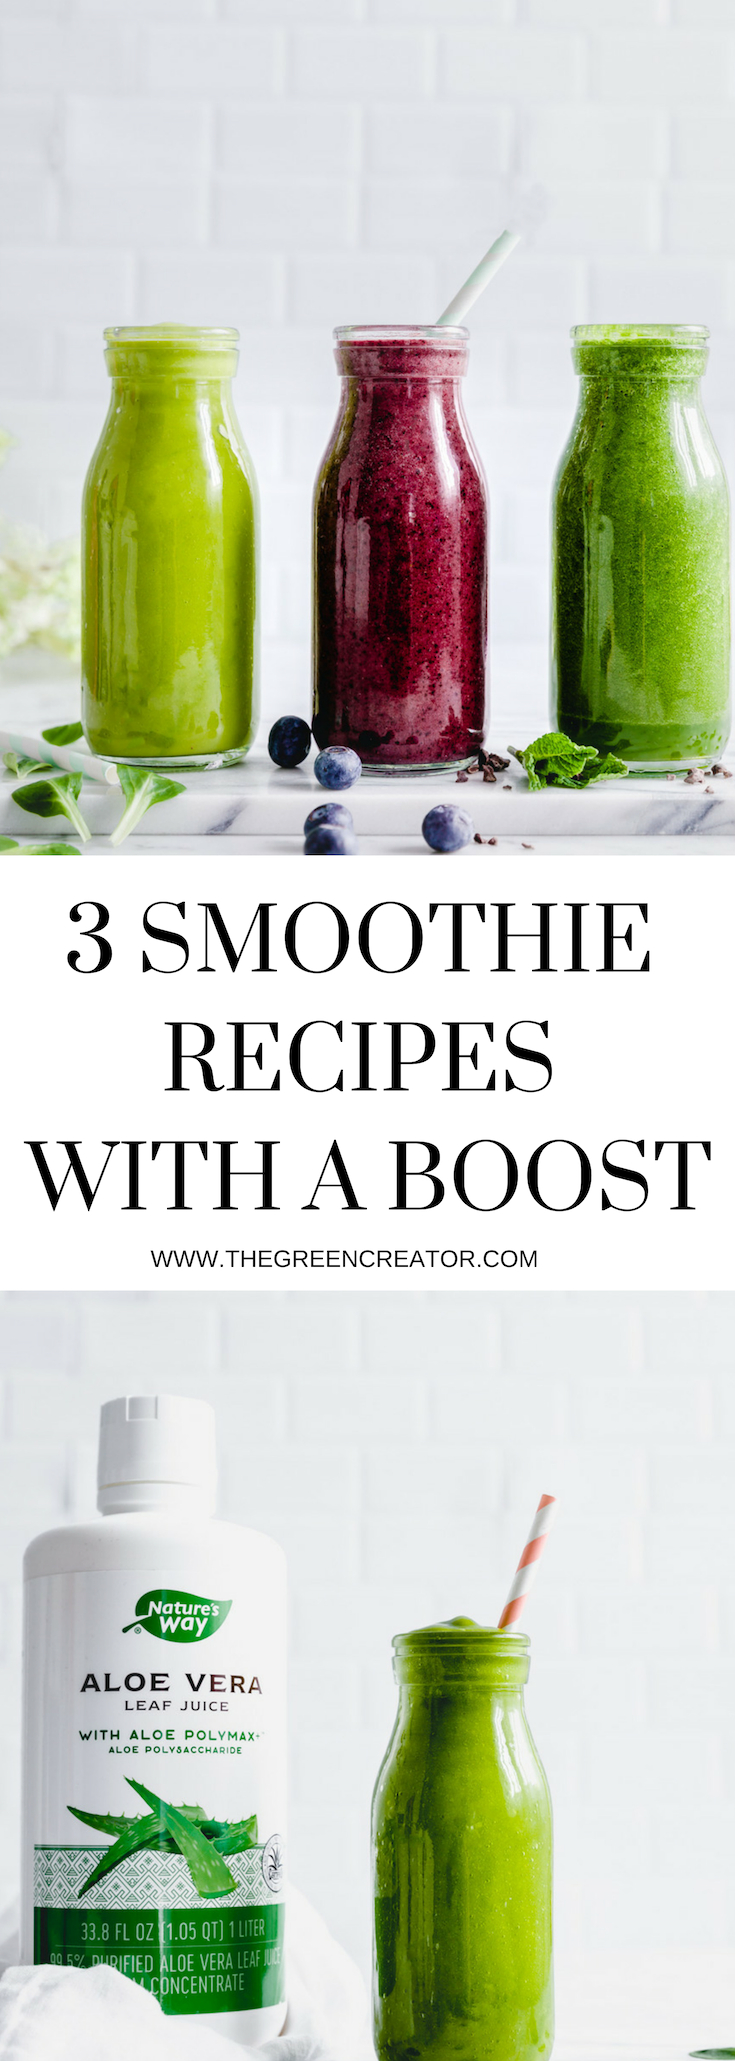 3 Smoothie Recipes With A Boost